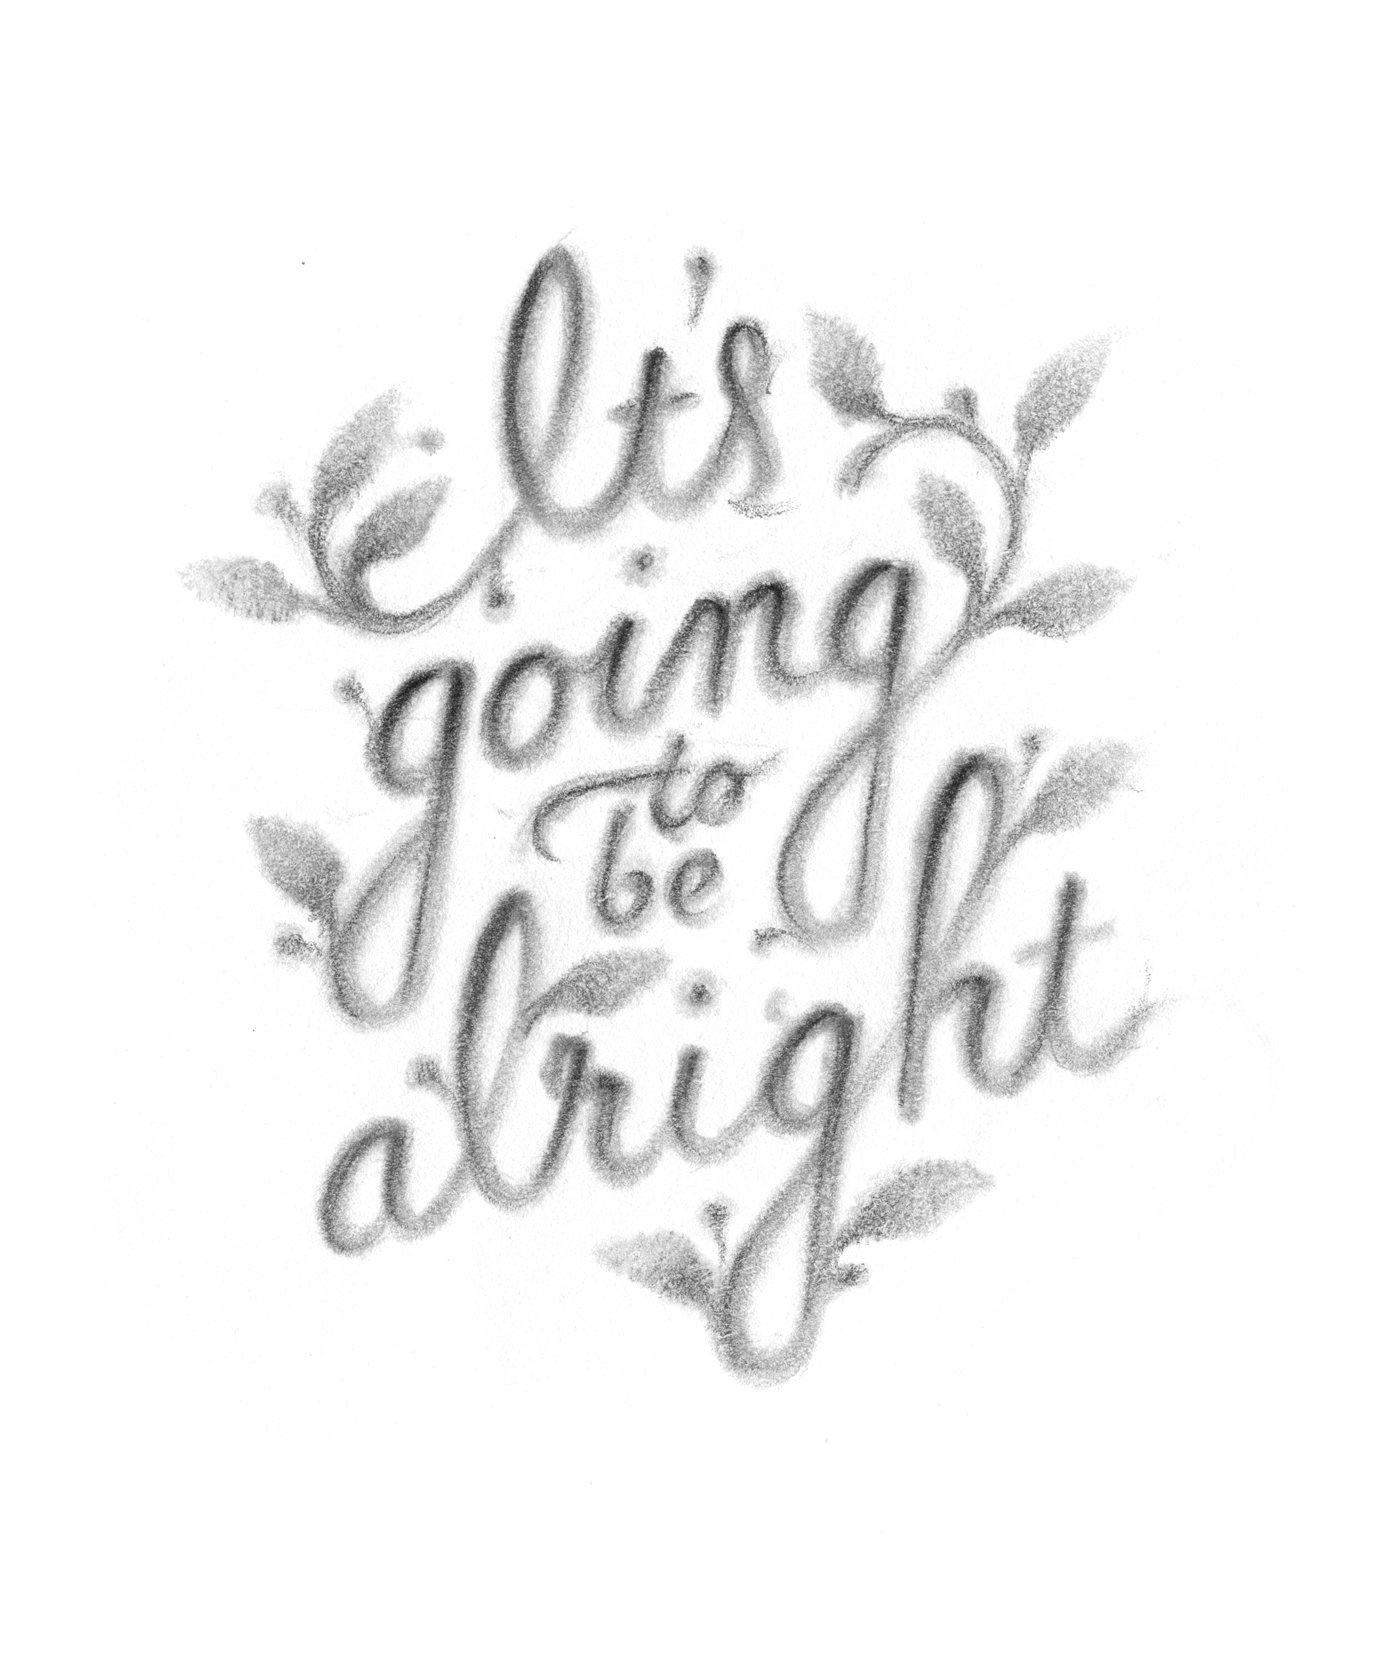 "It's going to be alright," illustrated lettering by Laura Dreyer, lyrics by Sara Groves.